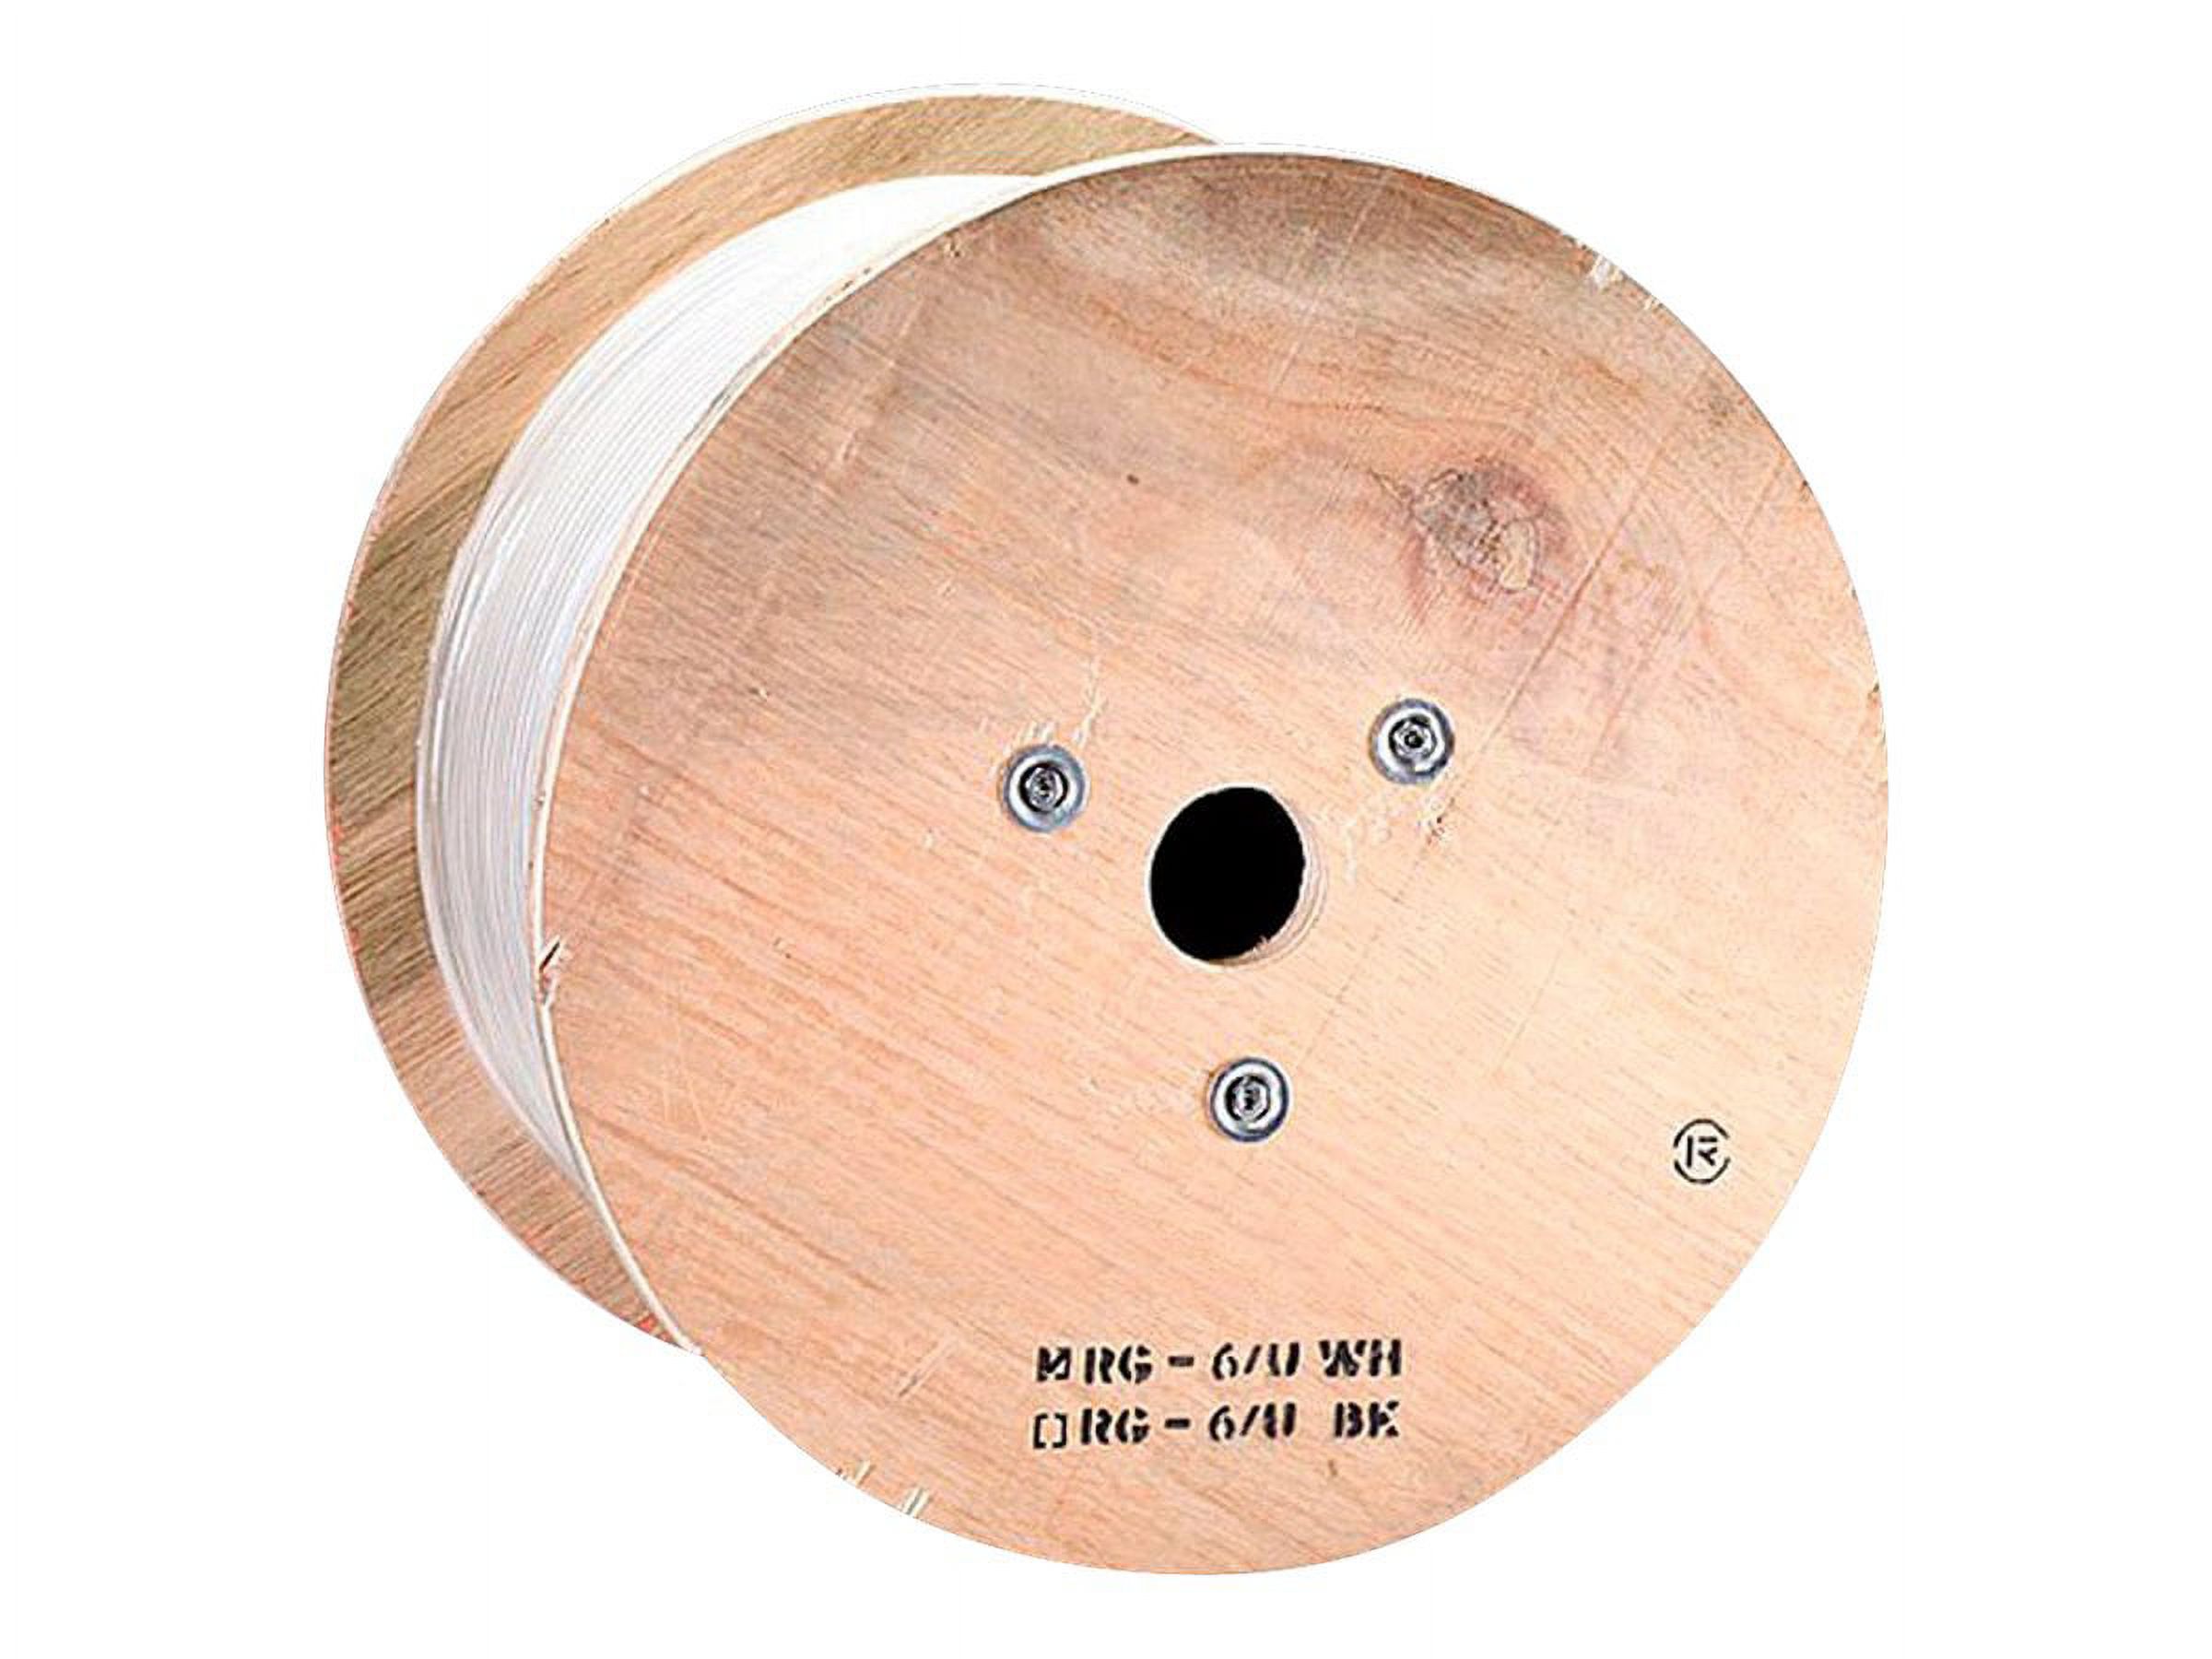 Monoprice - Bulk cable - 1000 ft - quad shielded coaxial - white - solid - image 1 of 2